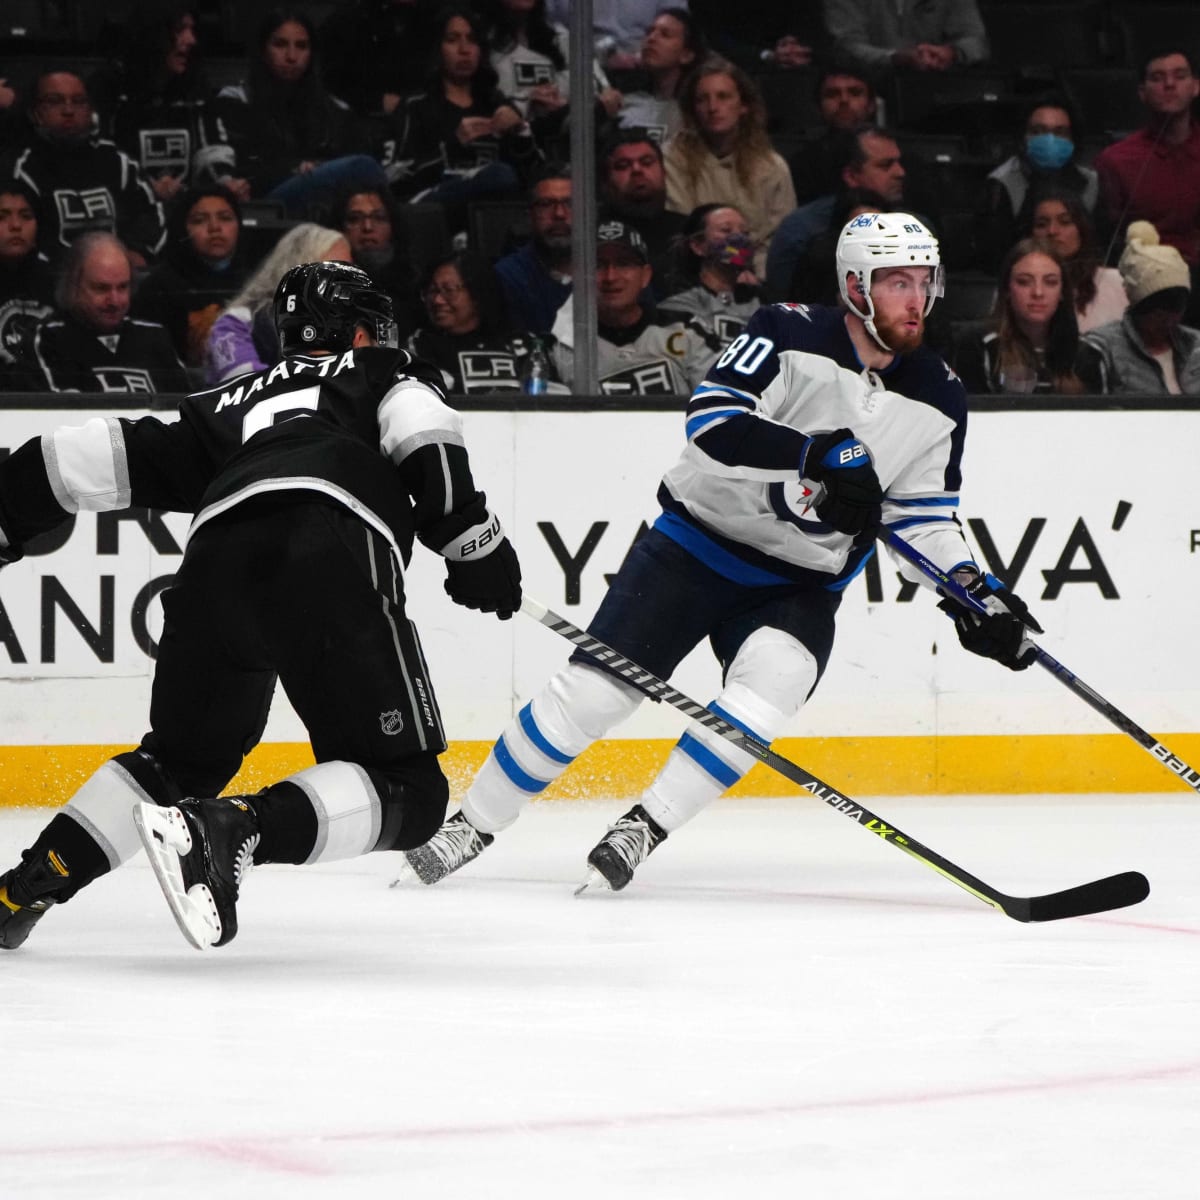 Newly acquired Kings center Pierre-Luc Dubois ready to 'just fully be me' –  Daily News